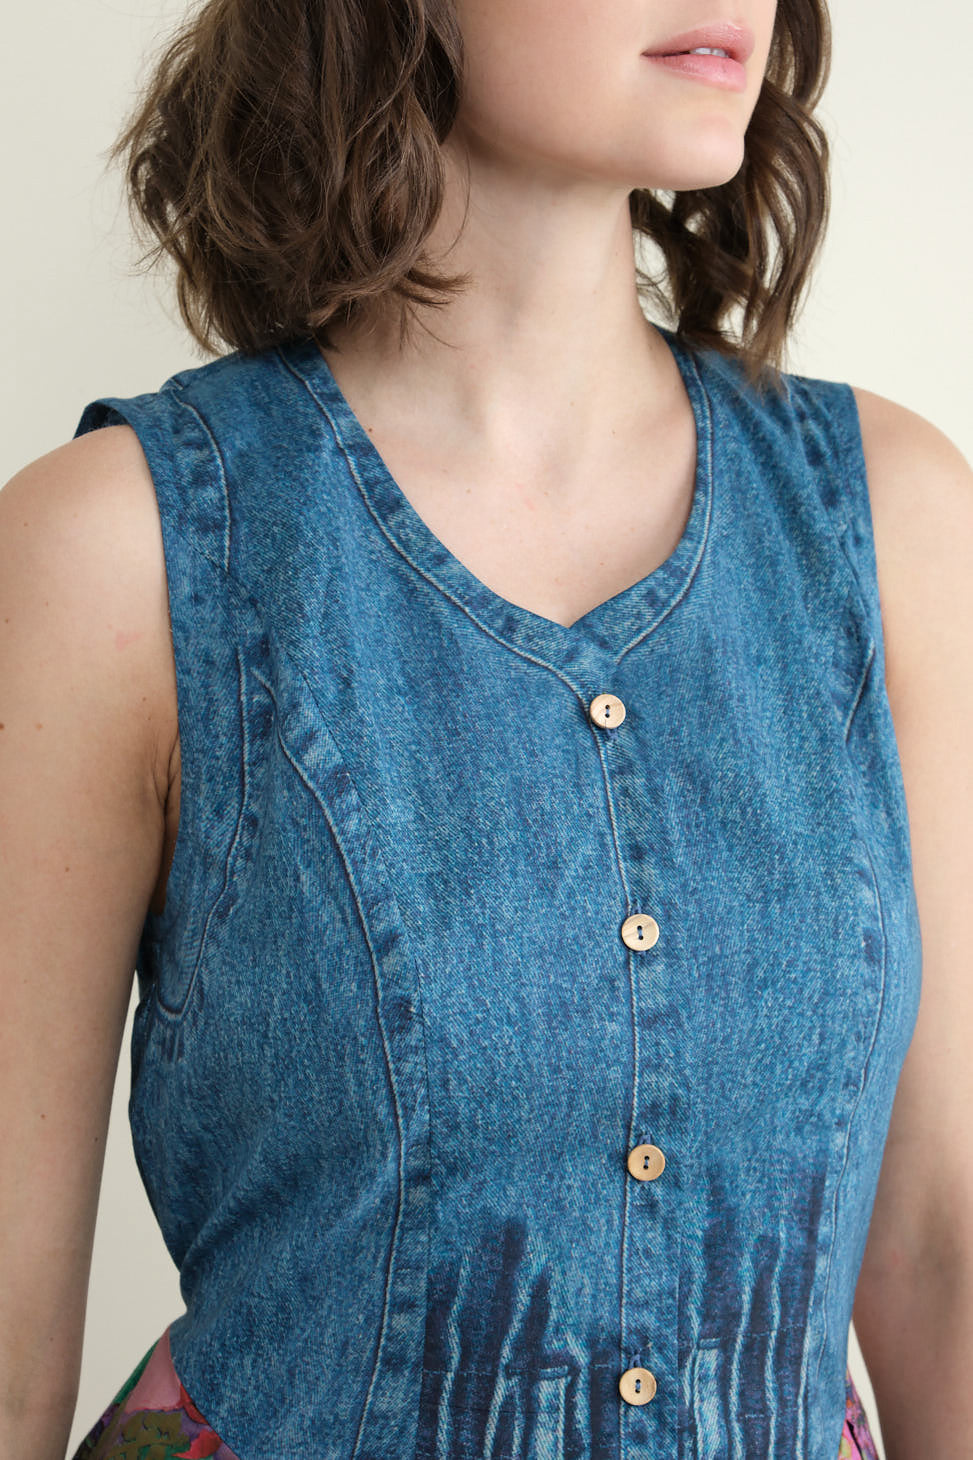 Neckline on Sleeveless Dress in Jeans and Flowers